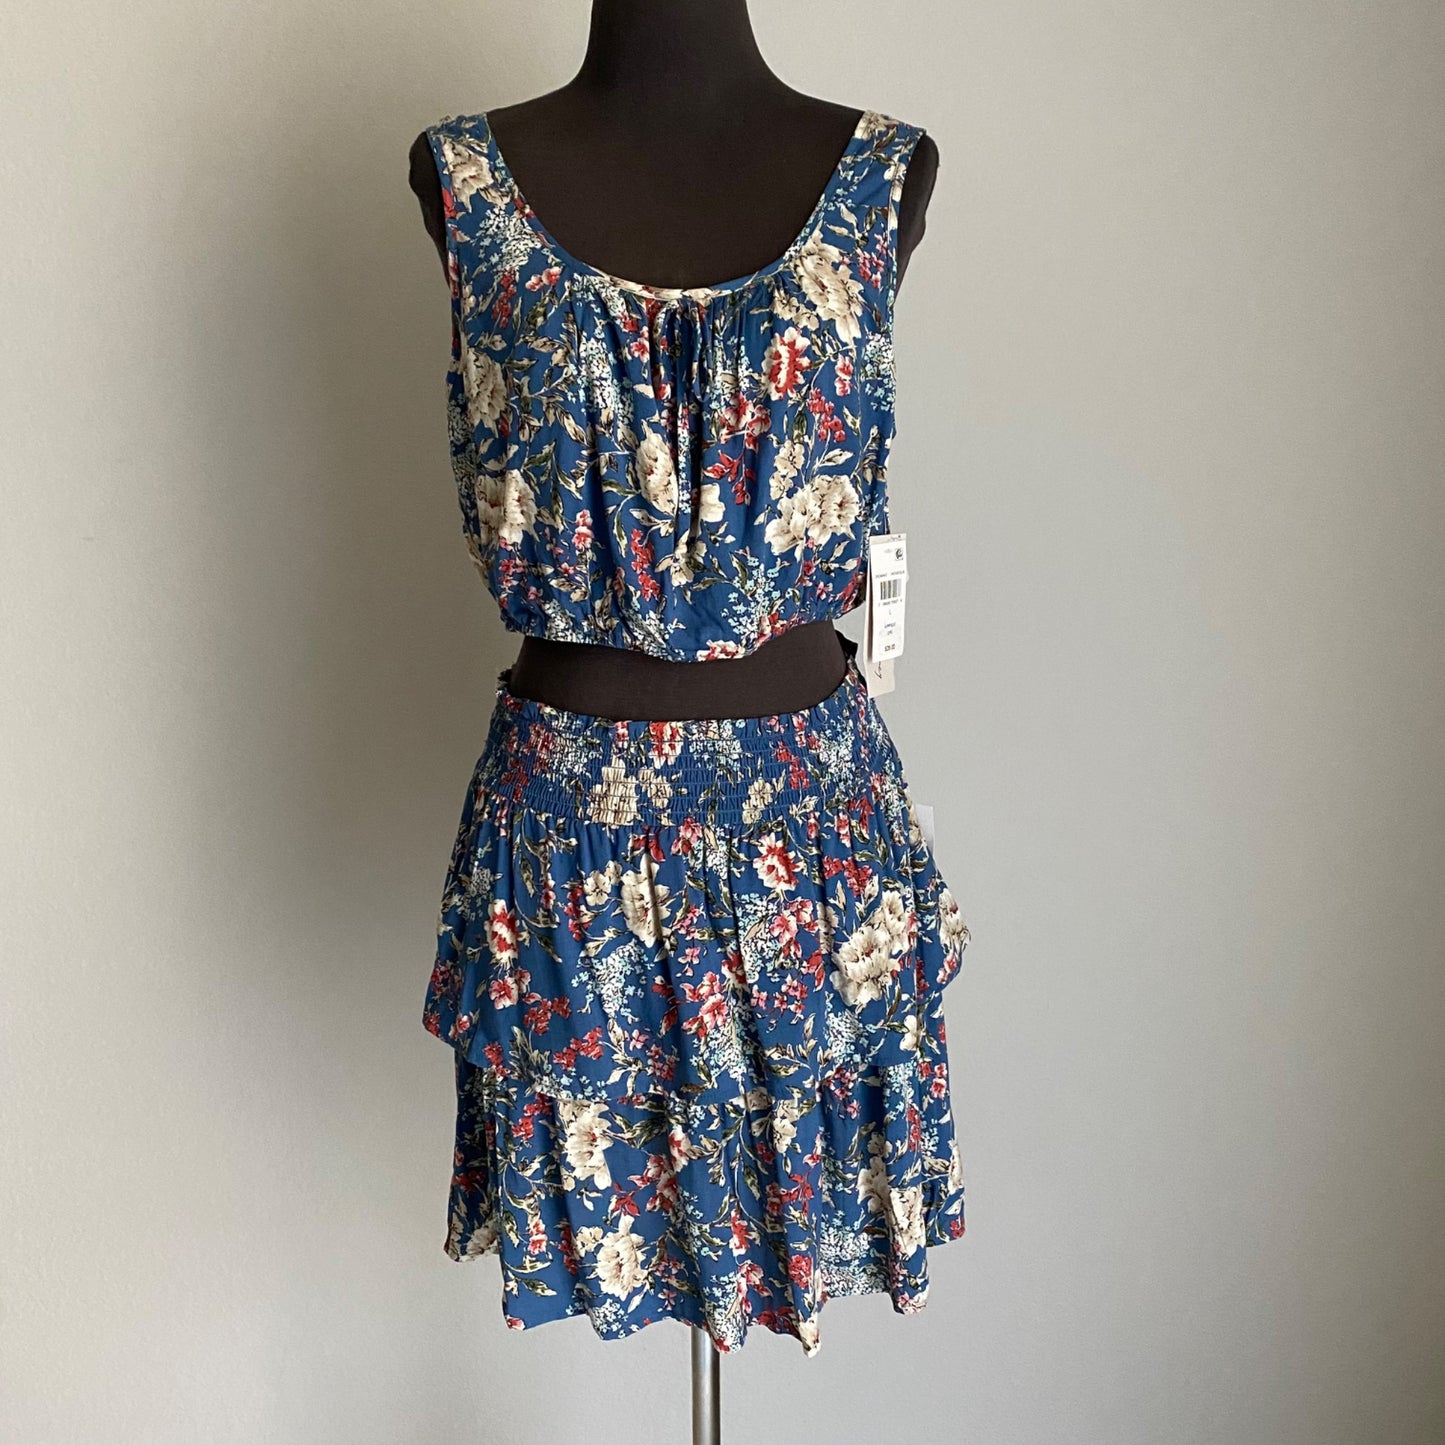 Kingston grey sz L floral crop top and skirt tiered 2 piece NWT